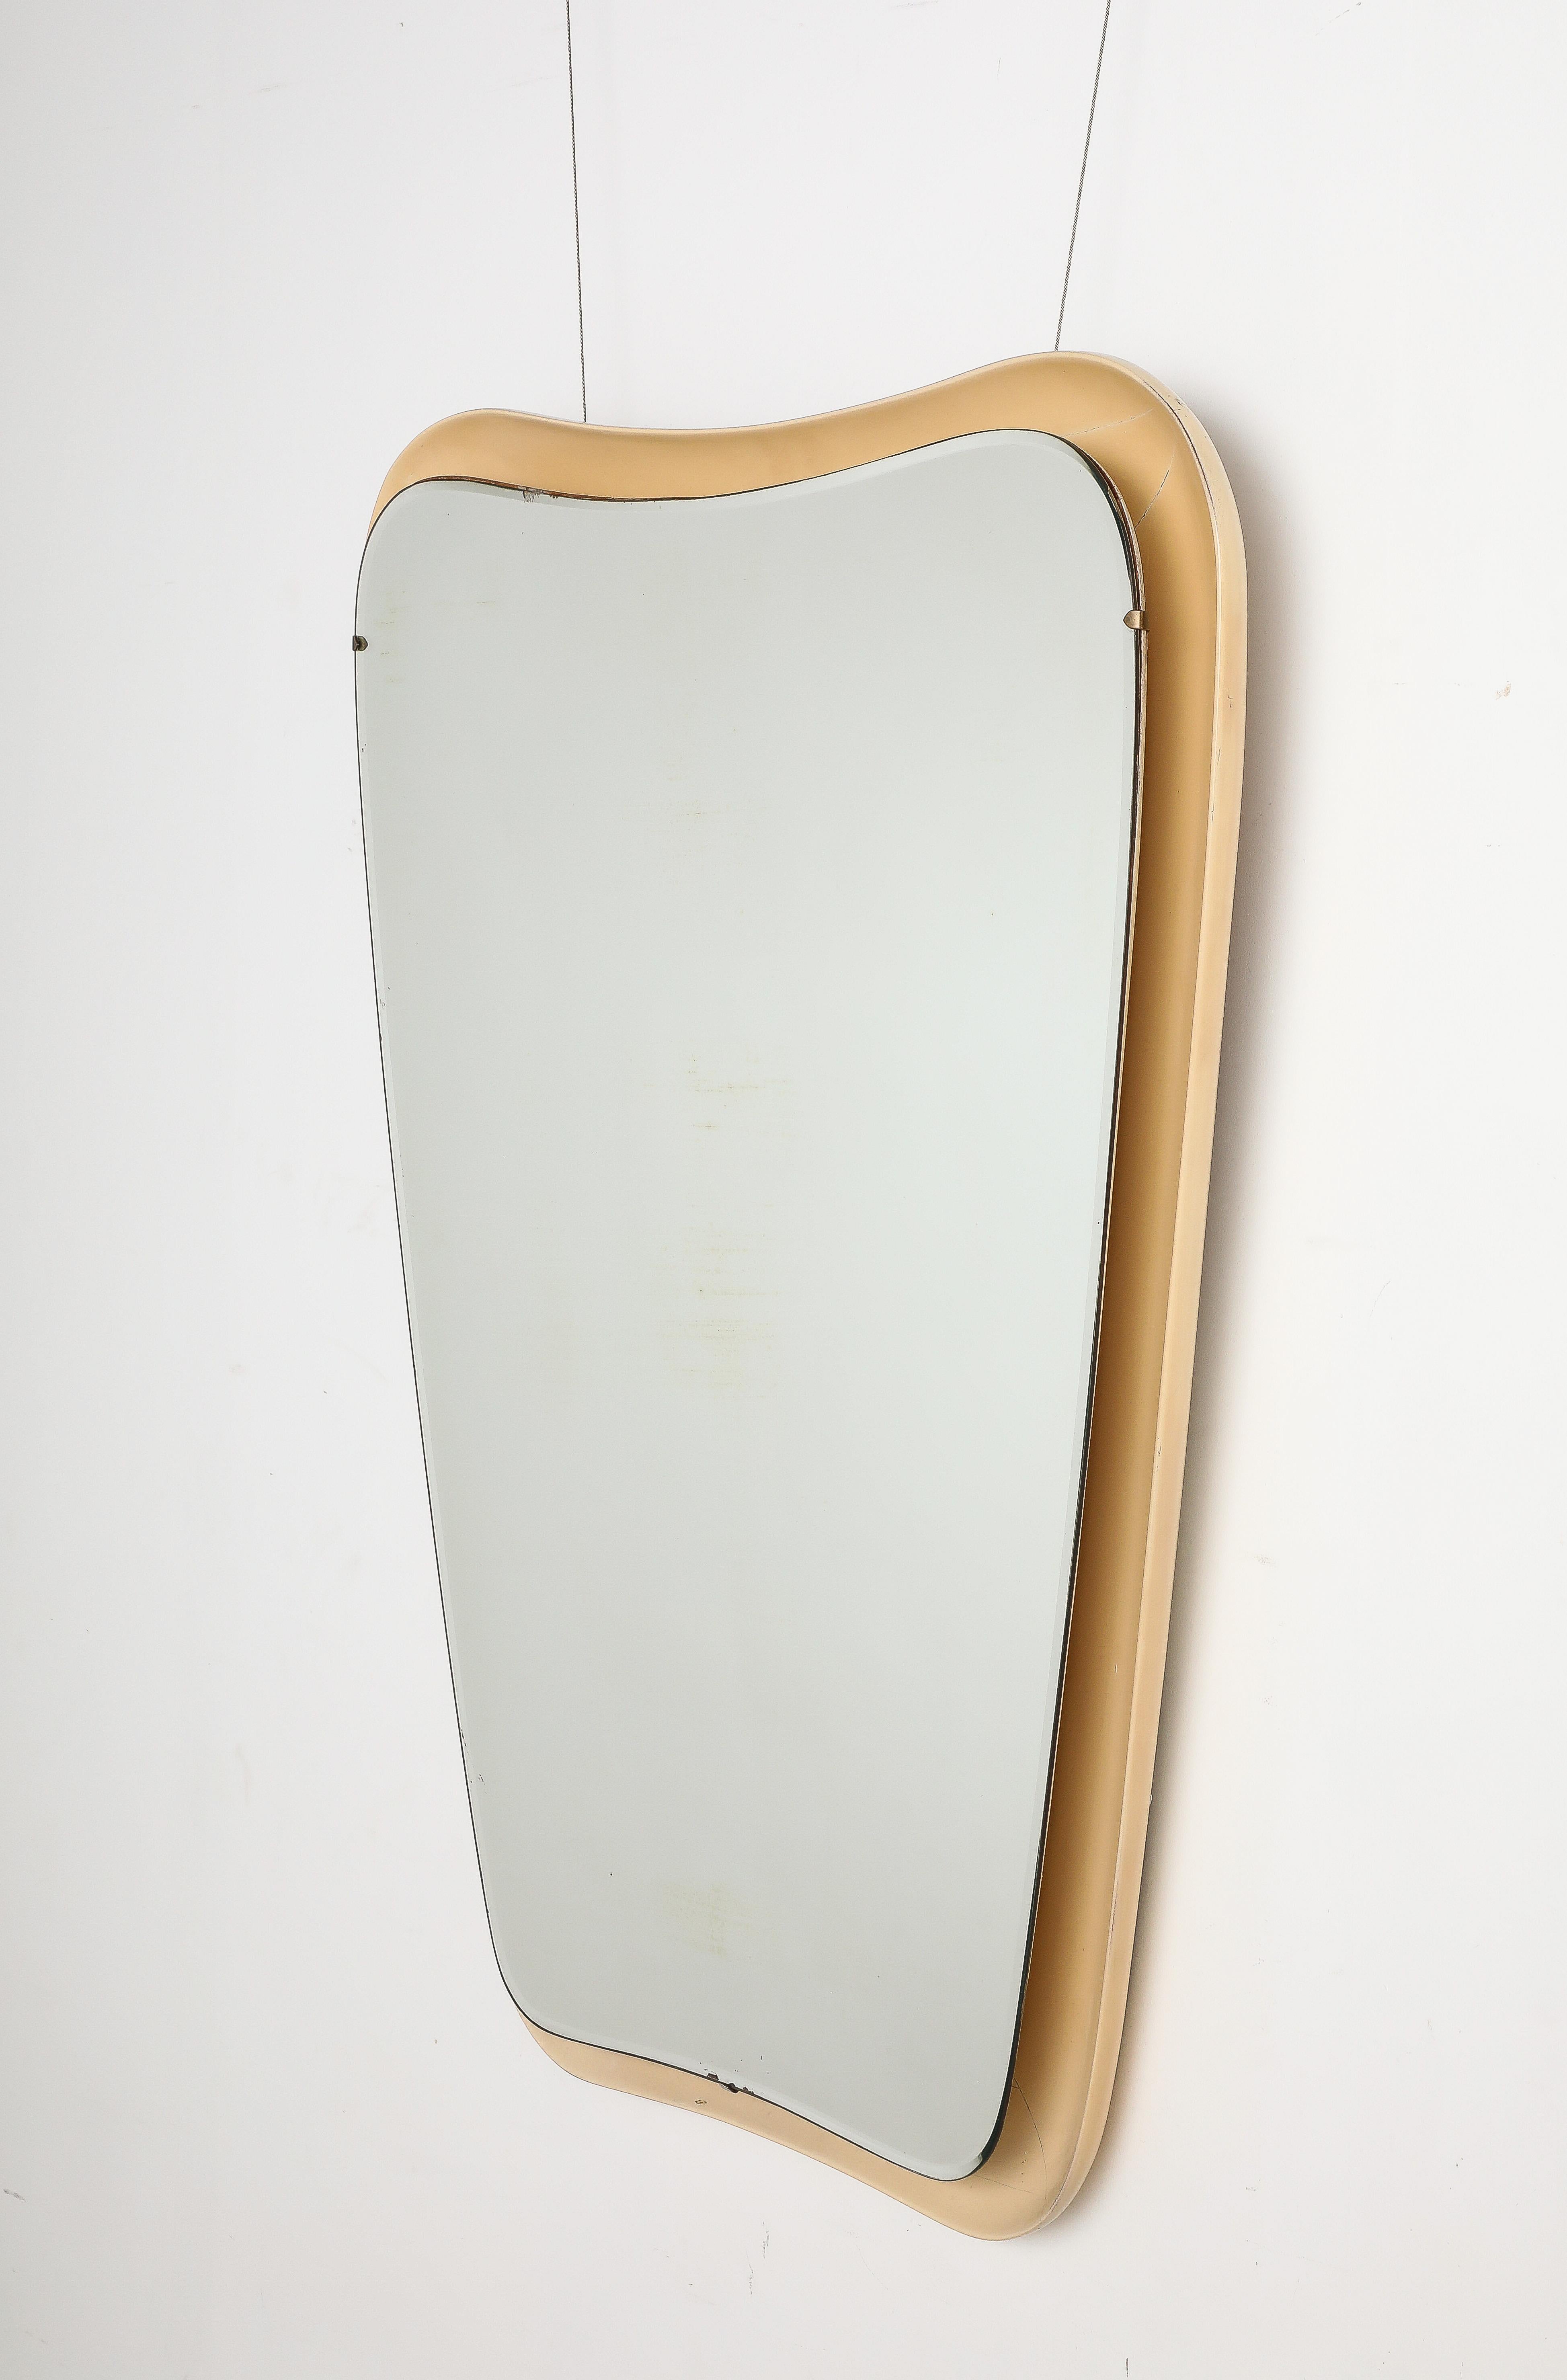 Italian Modernist Lacquered Floating Wall Mirror, Italy, circa 1960  For Sale 3